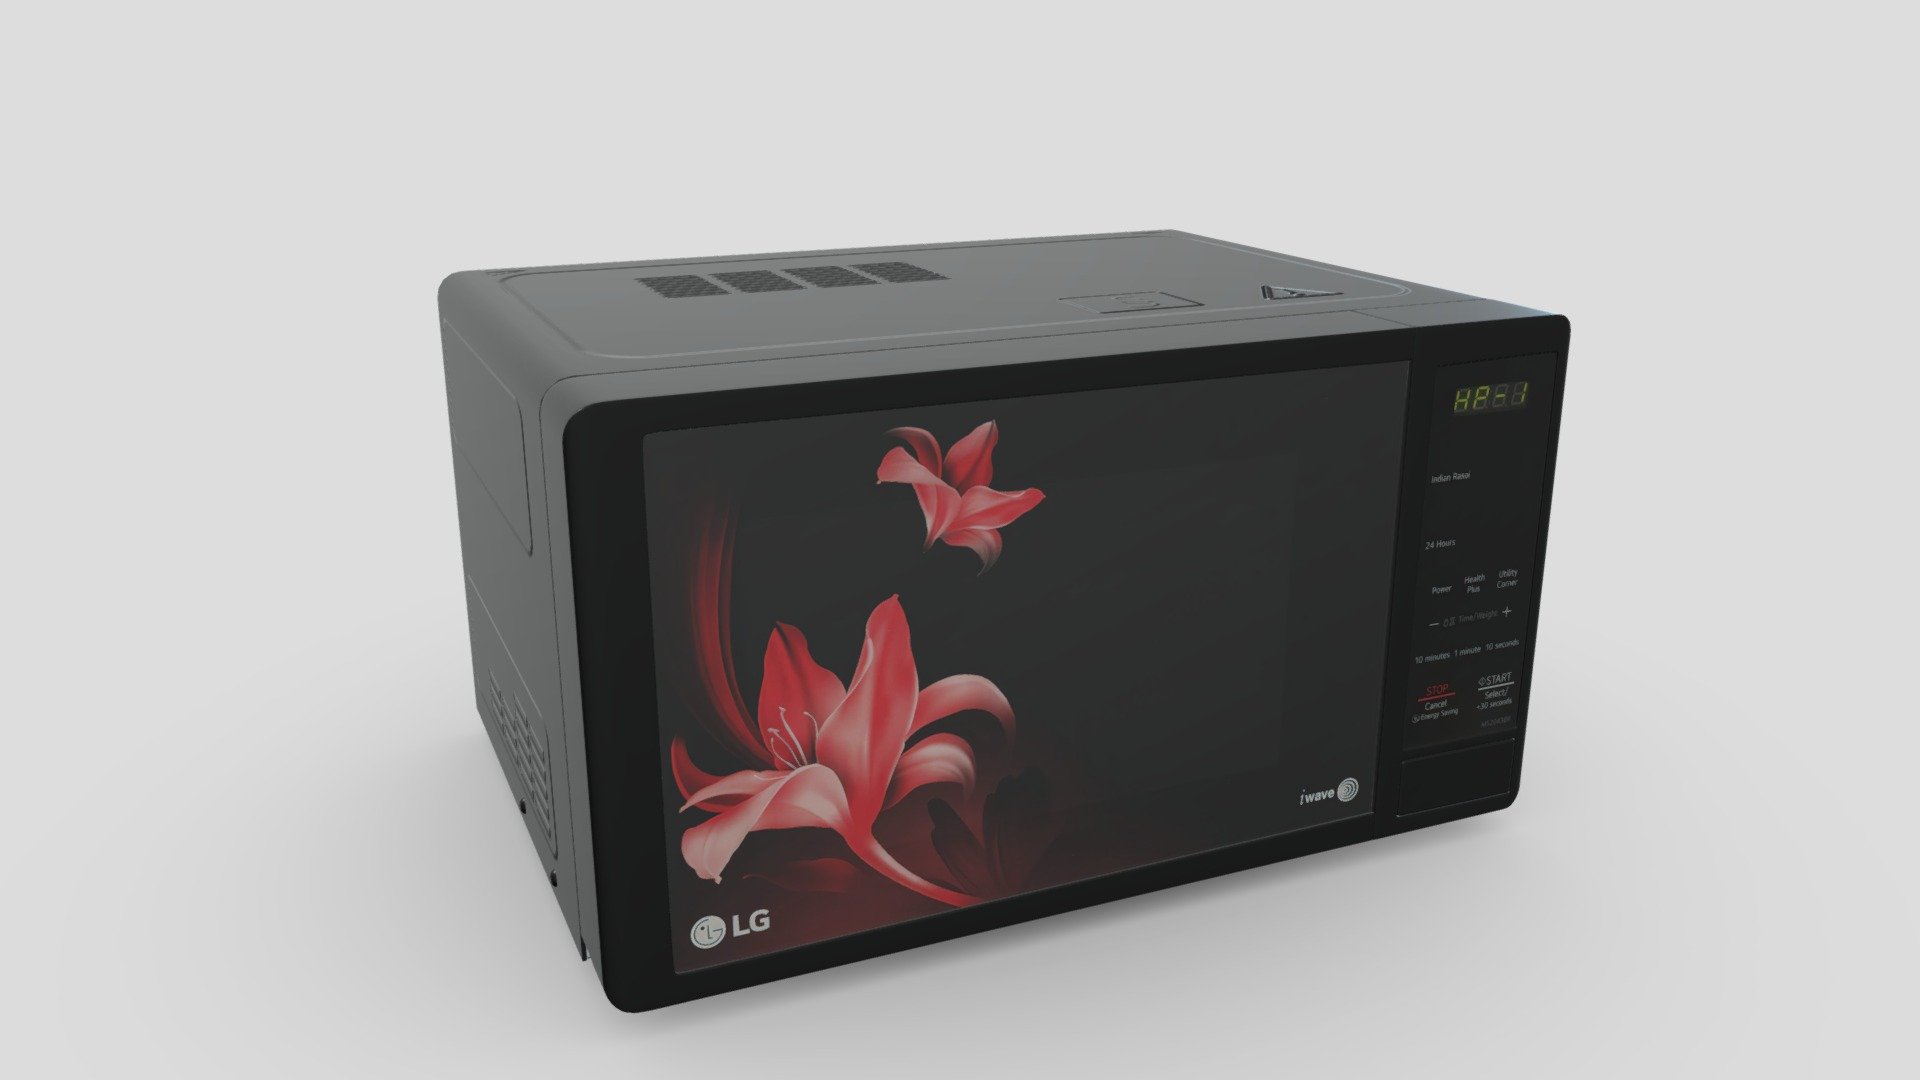 Check out this high quality 3D model of a Microwave Oven.

For your 3D modelling requirements or if you wish to purchase this model, connect with us at info@shinobu3d.com.

We offer premium quality low poly 3D assets/models for AR/VR applications, 3D visualisations, 3D product configurators, 3D printing &amp; 3D animations.

Visit https://www.shinobu3d.com for more on us 3d model